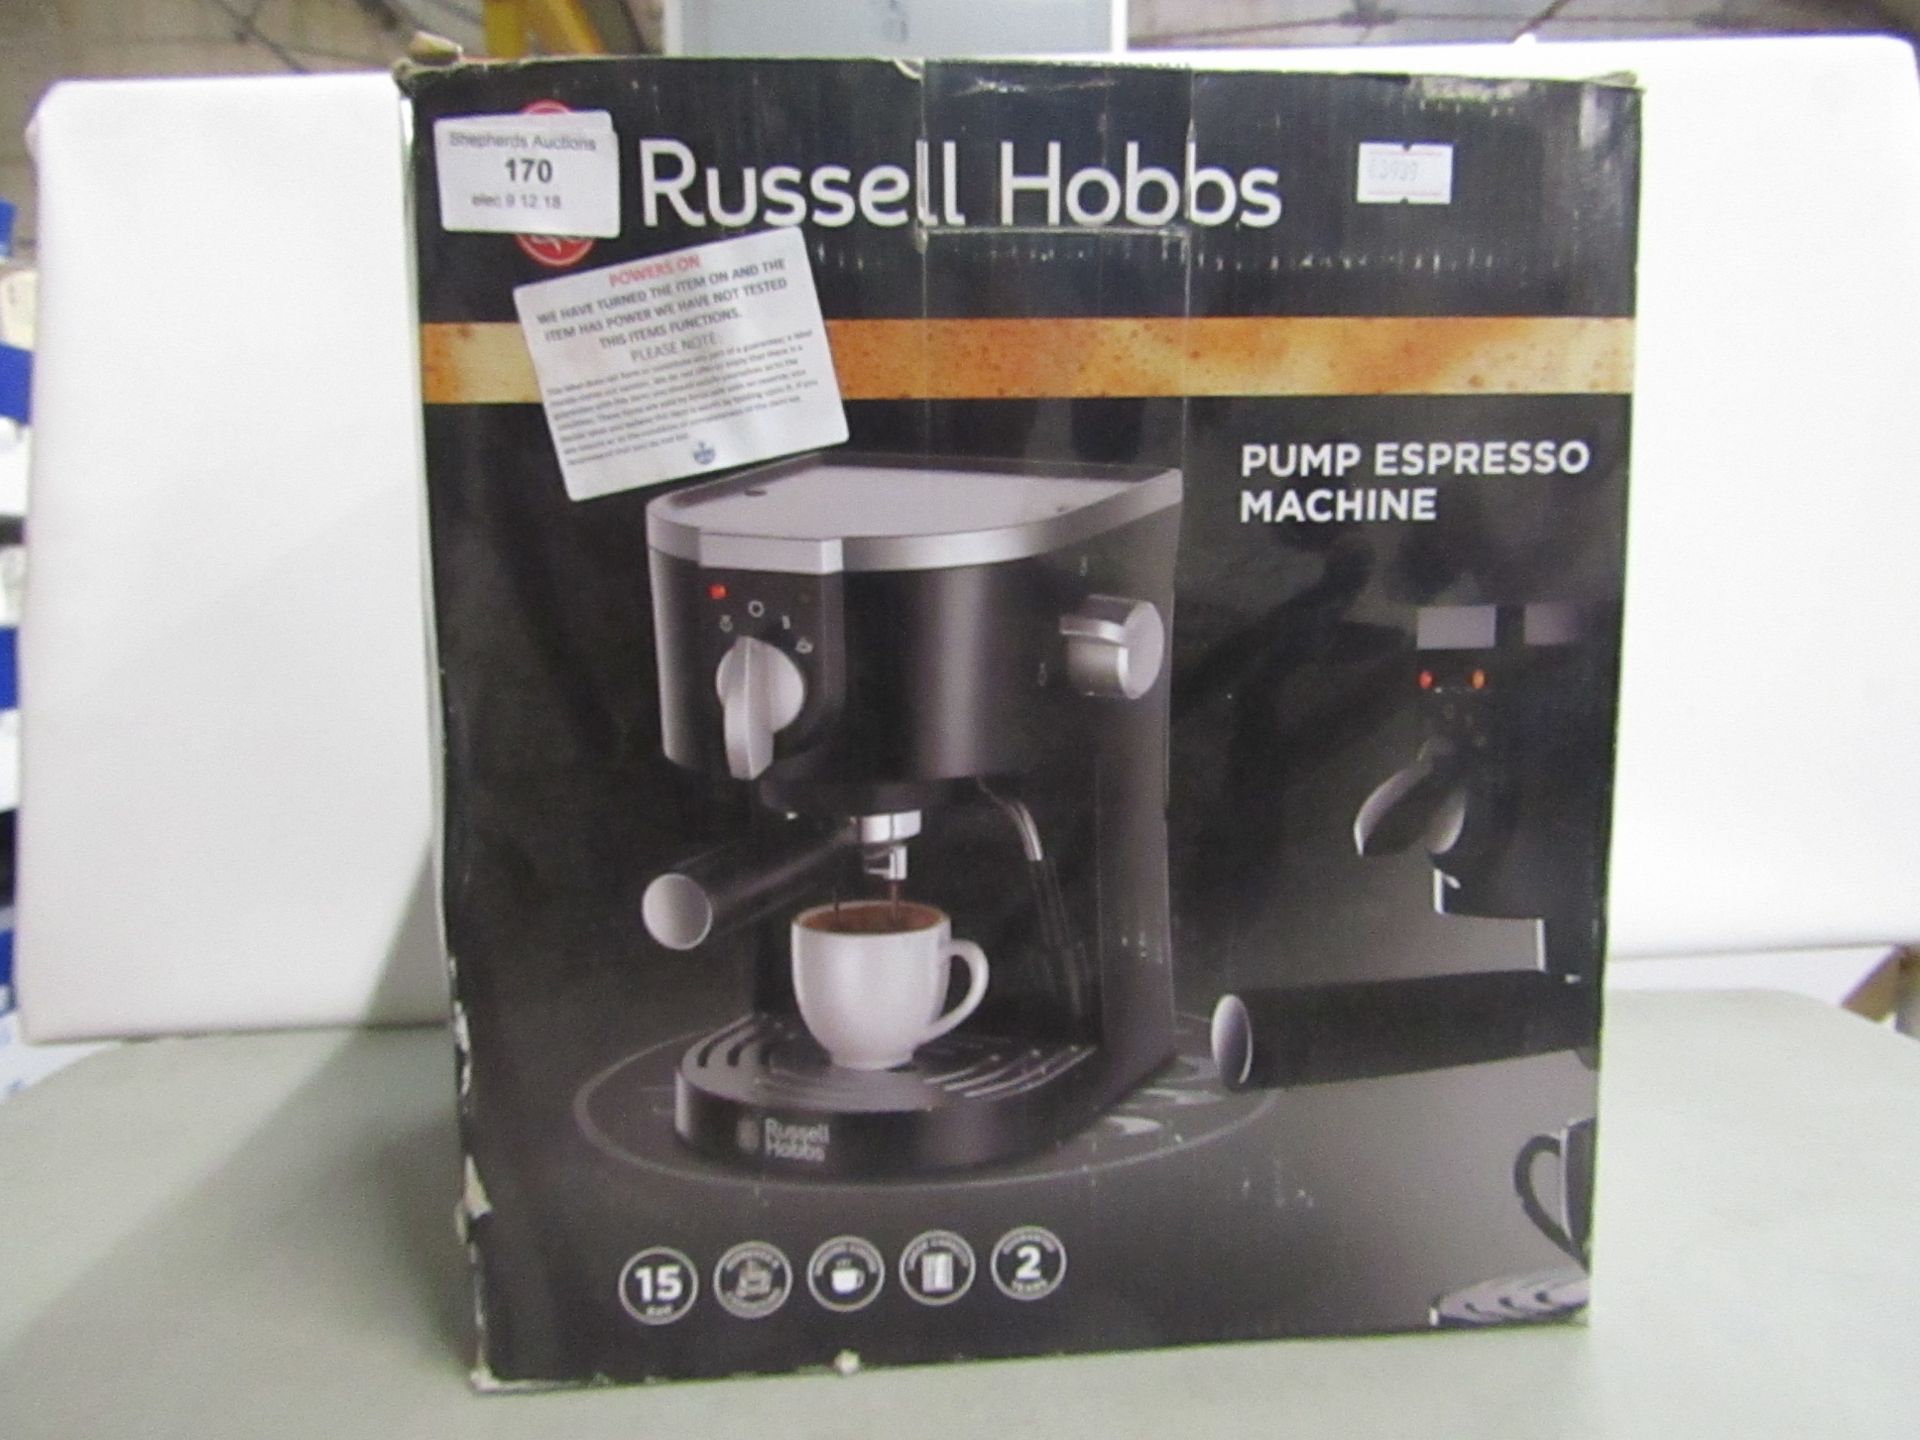 Russell Hobbs Pump Espresso machine, boxed and powers on